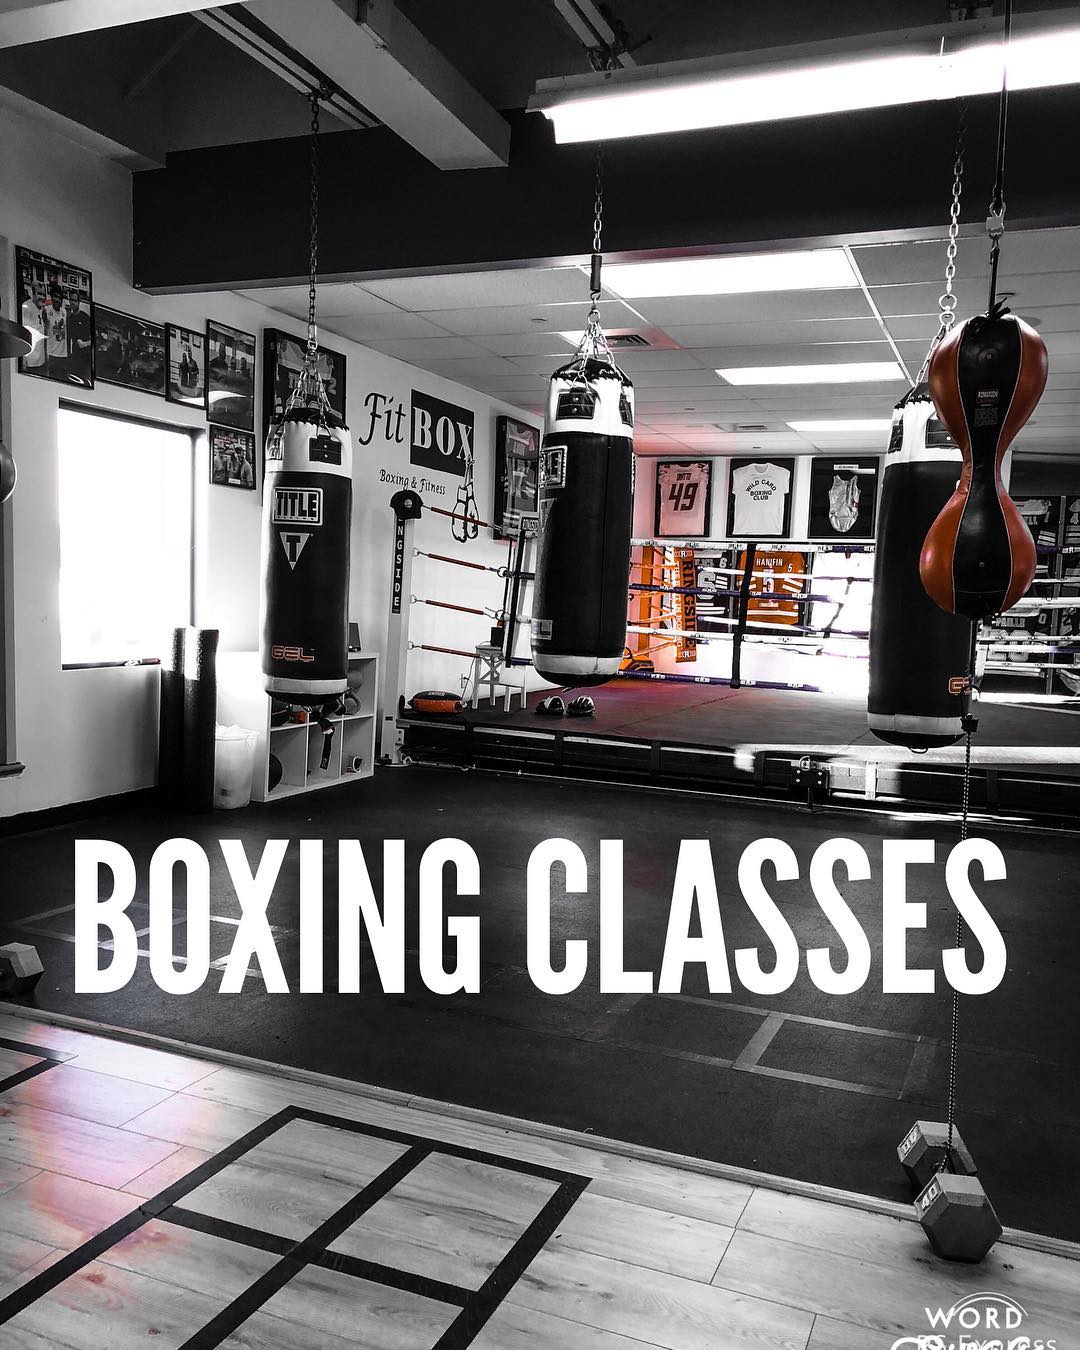 Sign up Today to try a FREE Boxing Workout located next Legacy Place, Dedham, Ma. . #boxing #fitness #boxingclass #boxingtraining #boxingtrainer #exercise #workout #workoutmotivation #goals #newyear #newyearresolution #newyou #sweetscience #Boston #Dedham @tommymcinerney